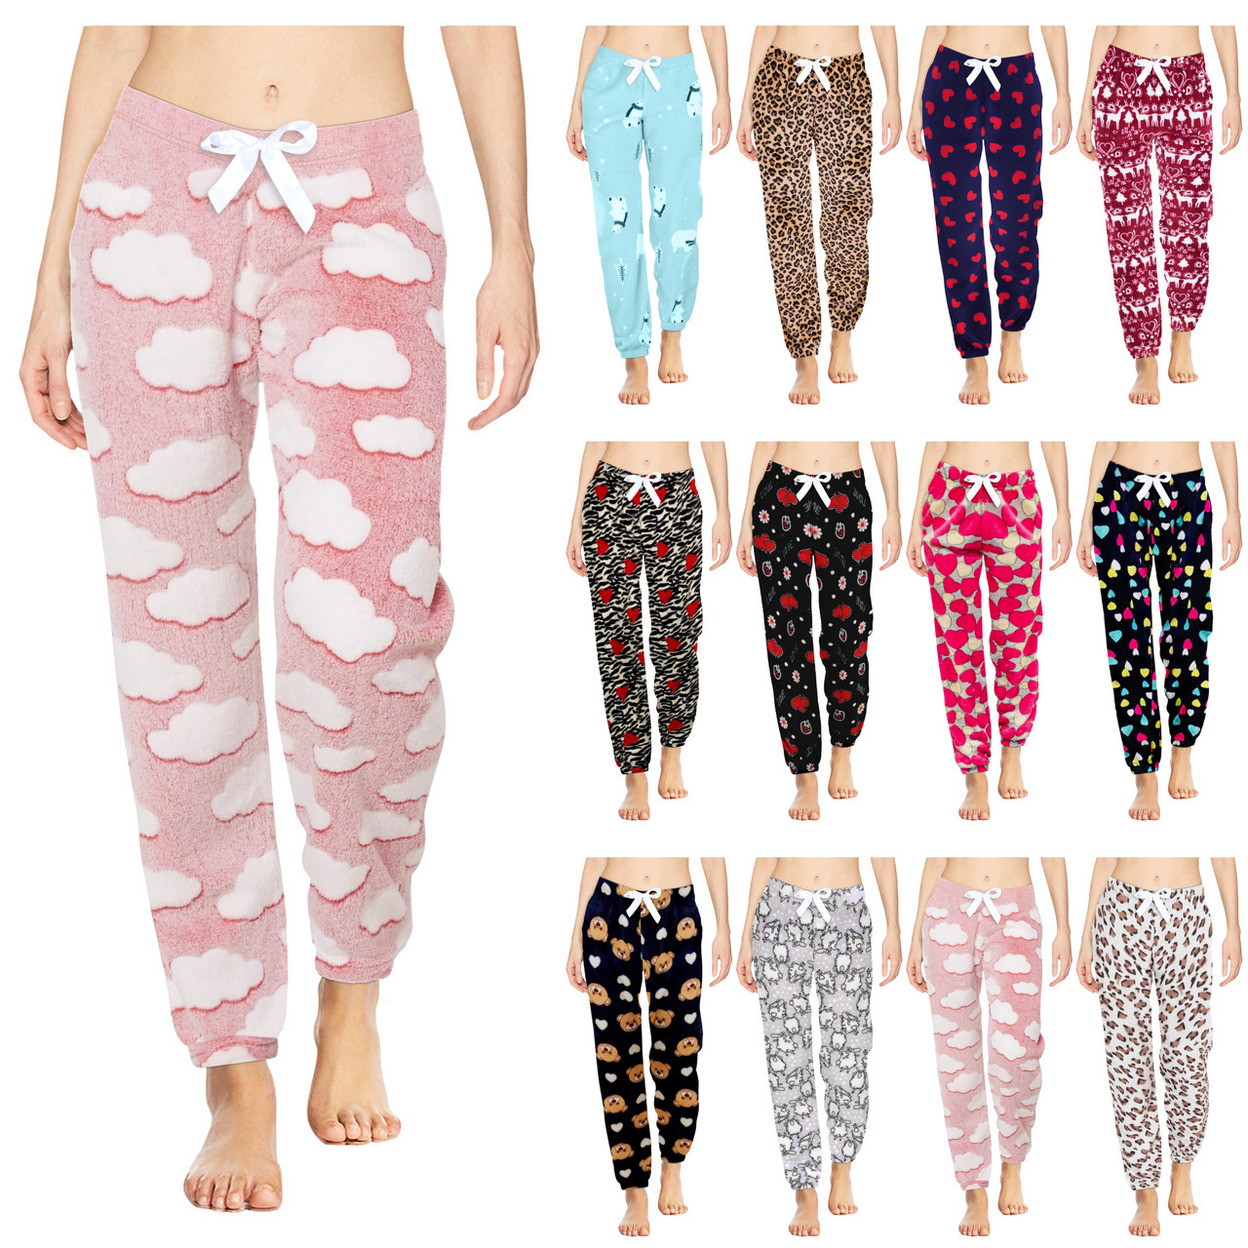 Multi-Pack: Women's Printed Ultra-Soft Comfy Stretch Micro-Fleece Pajama Lounge Pants - 1-pack, Love, Xx-large